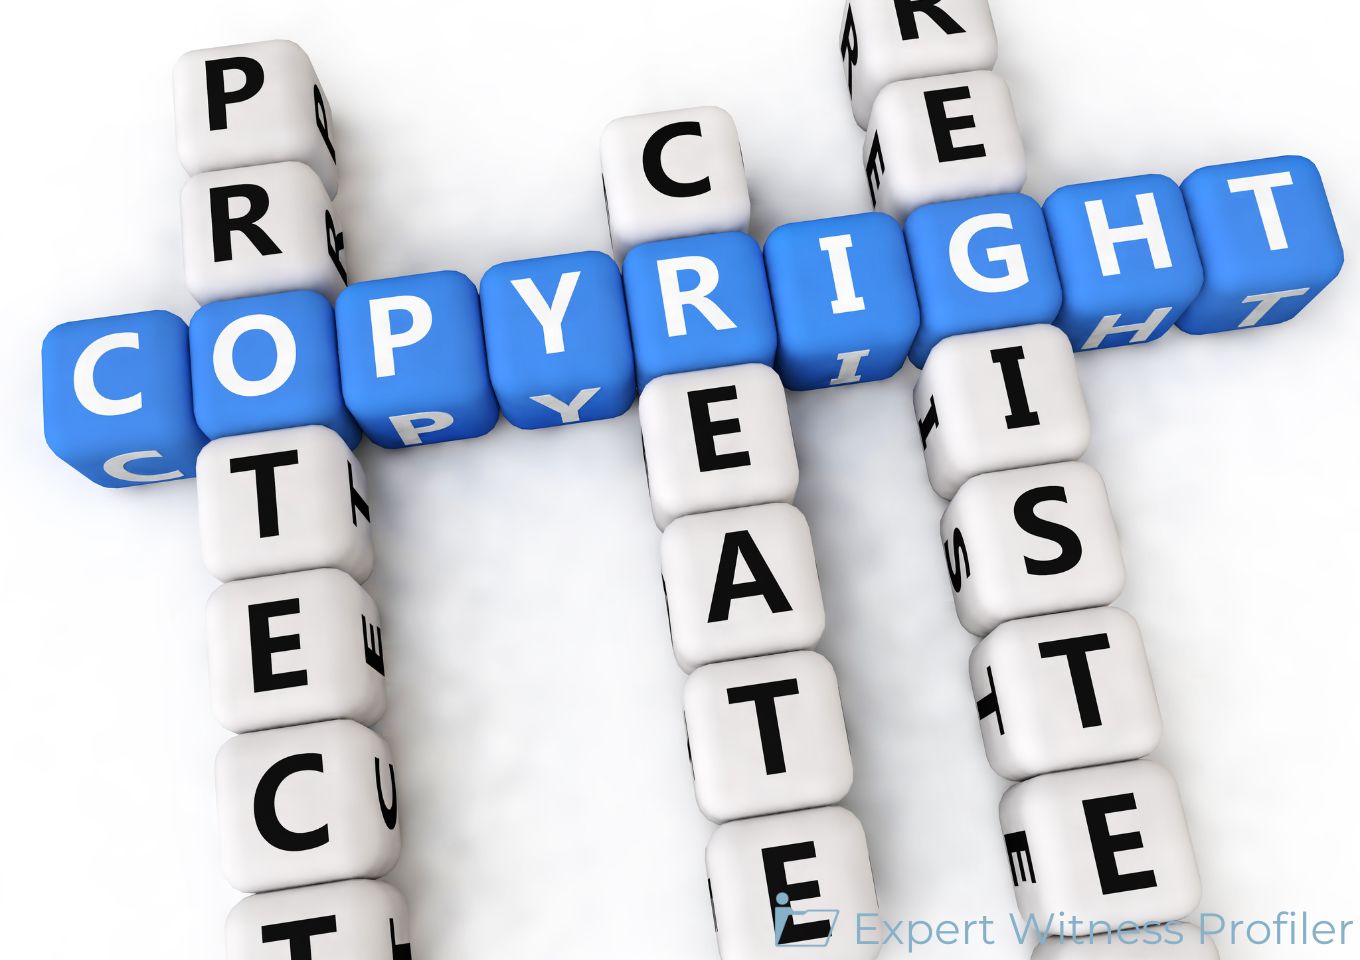 Court rejects the Film Finance and Distribution Expert Witness' opinion on substantial similarity citing lack of literary expertise in Copyright Infringement Suit